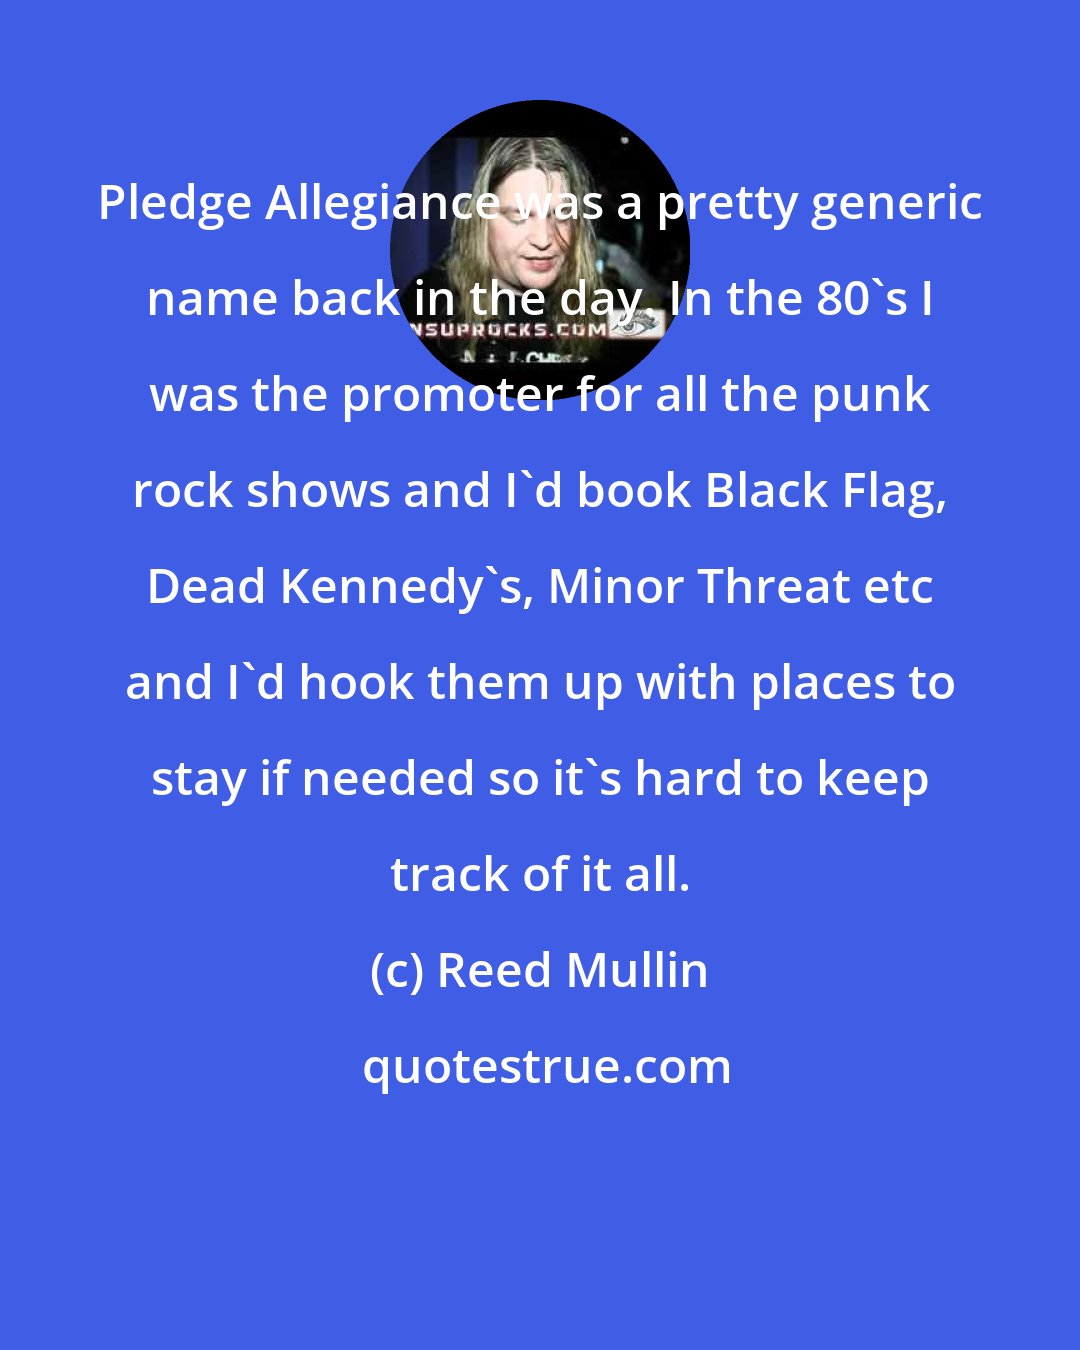 Reed Mullin: Pledge Allegiance was a pretty generic name back in the day. In the 80's I was the promoter for all the punk rock shows and I'd book Black Flag, Dead Kennedy's, Minor Threat etc and I'd hook them up with places to stay if needed so it's hard to keep track of it all.